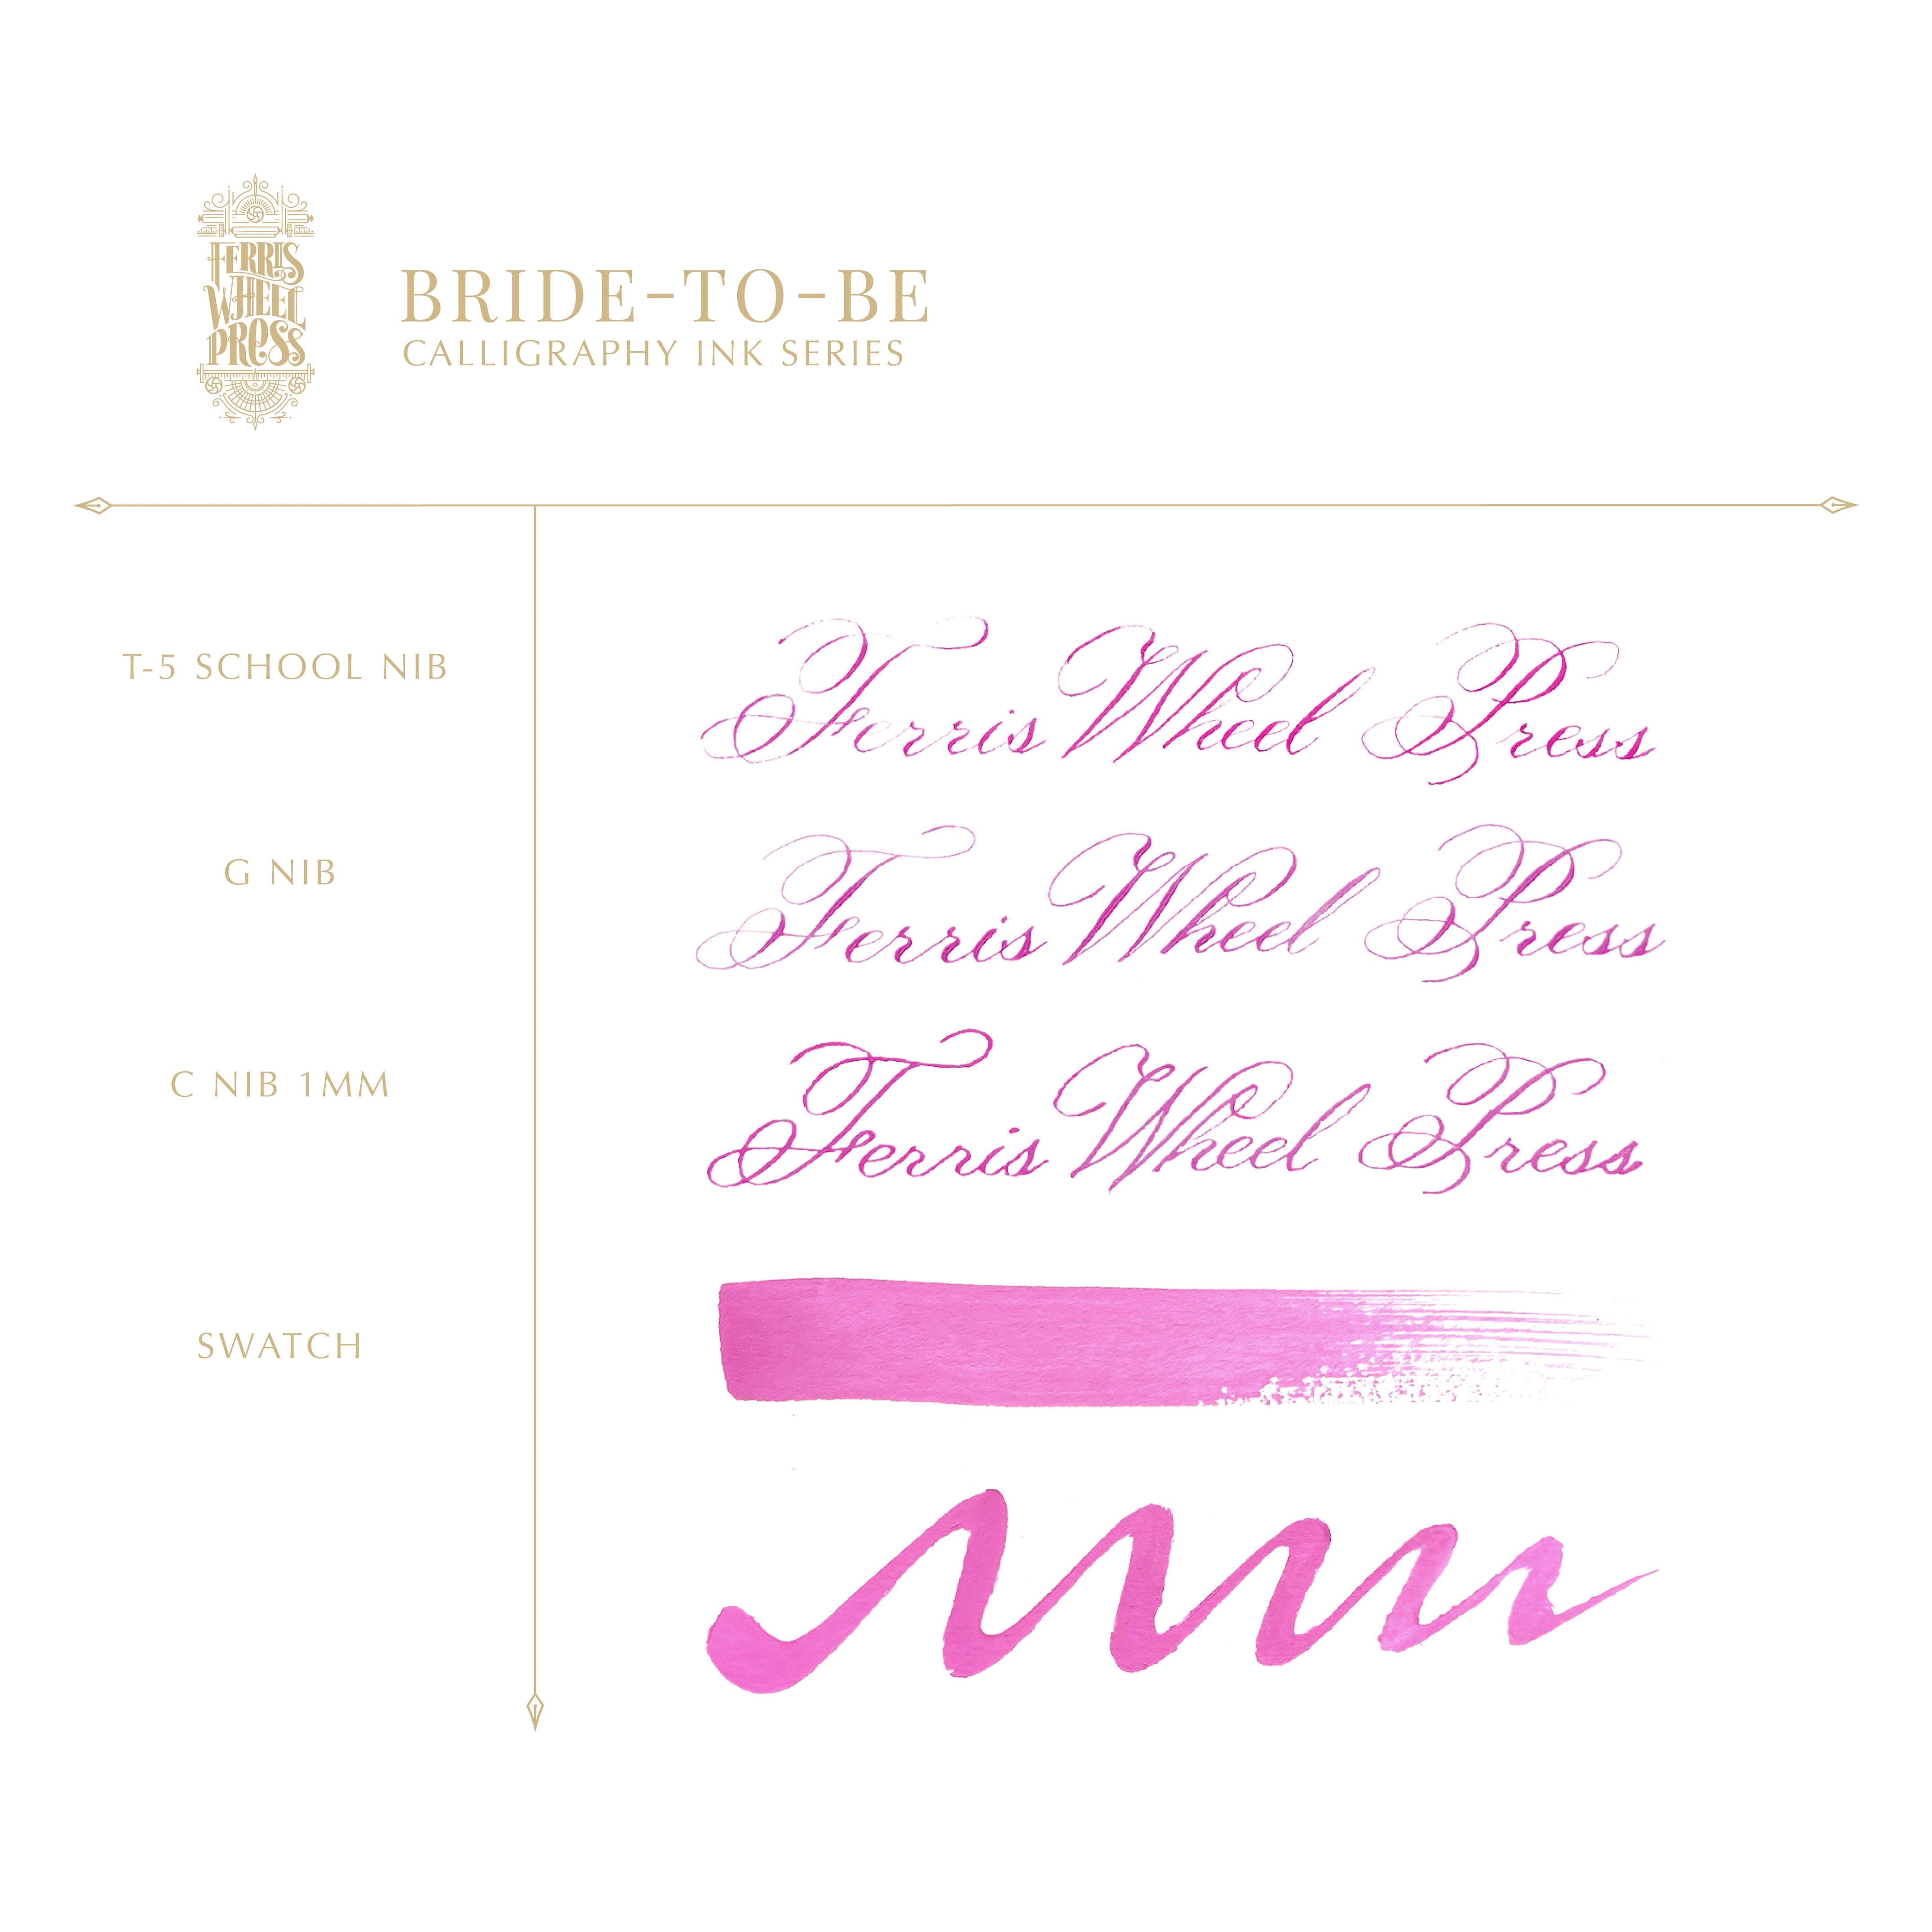 28ml Bride To Be